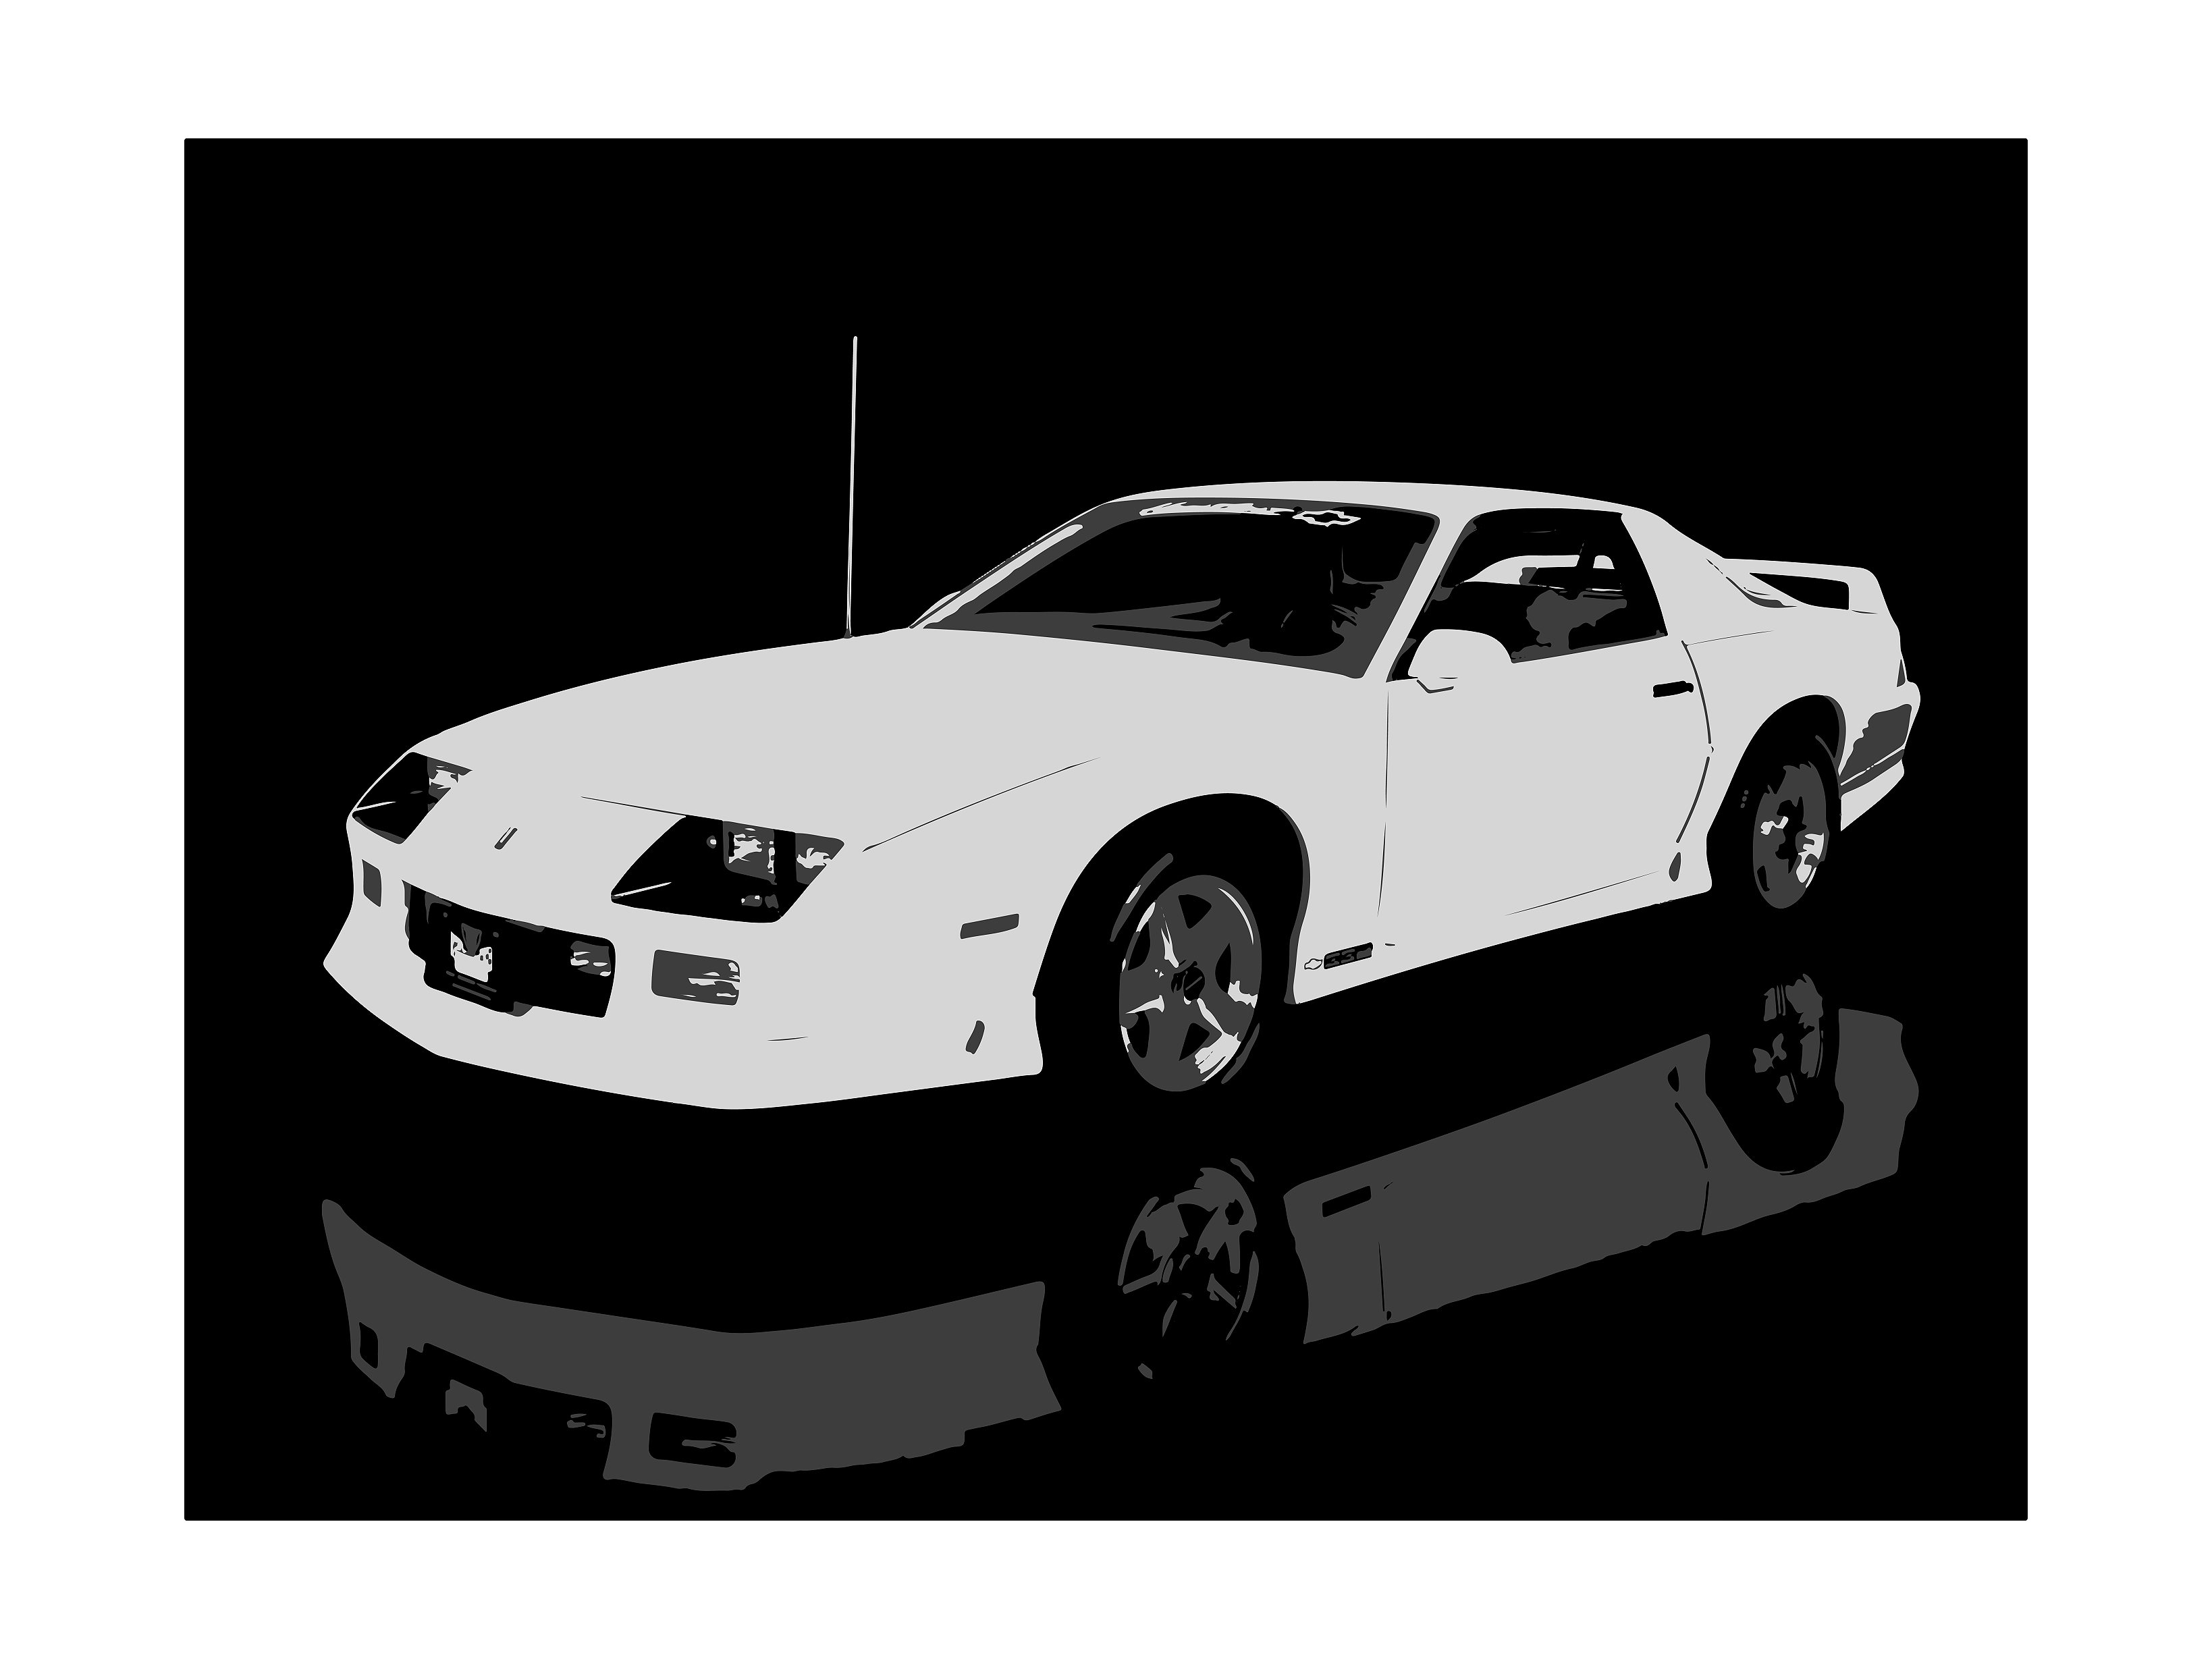 General 3277x2458 Chevrolet Camaro Chevrolet white monochrome artwork muscle cars American cars car simple background black background vehicle reflection minimalism frontal view headlights